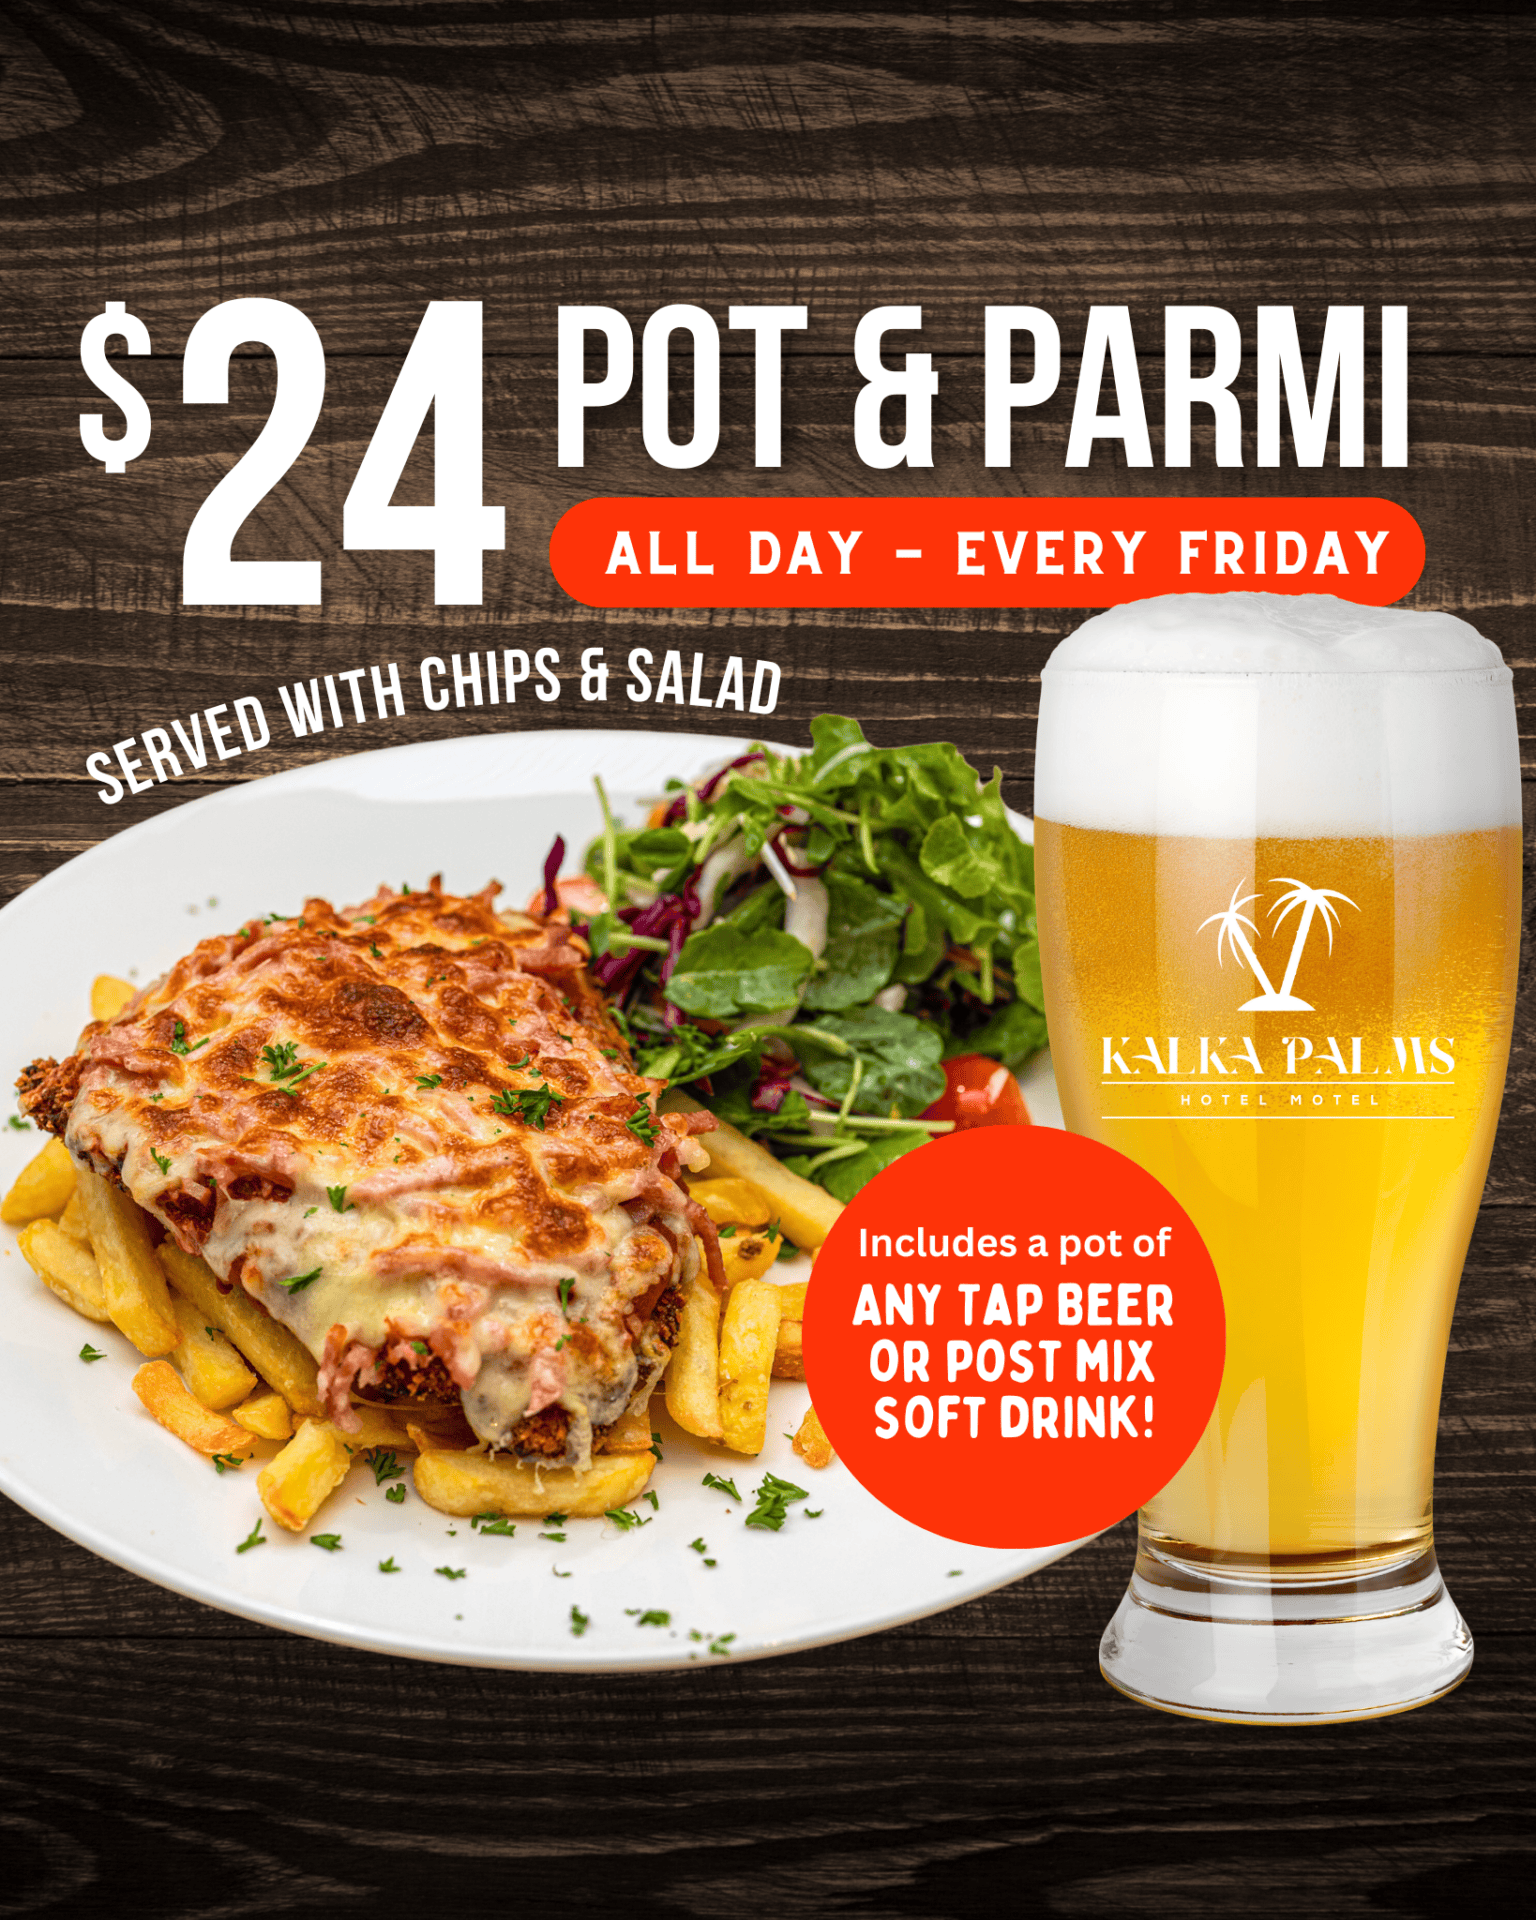 Friday Special - Pot and a Parmi for $24 at the Kalka Palms Hotel